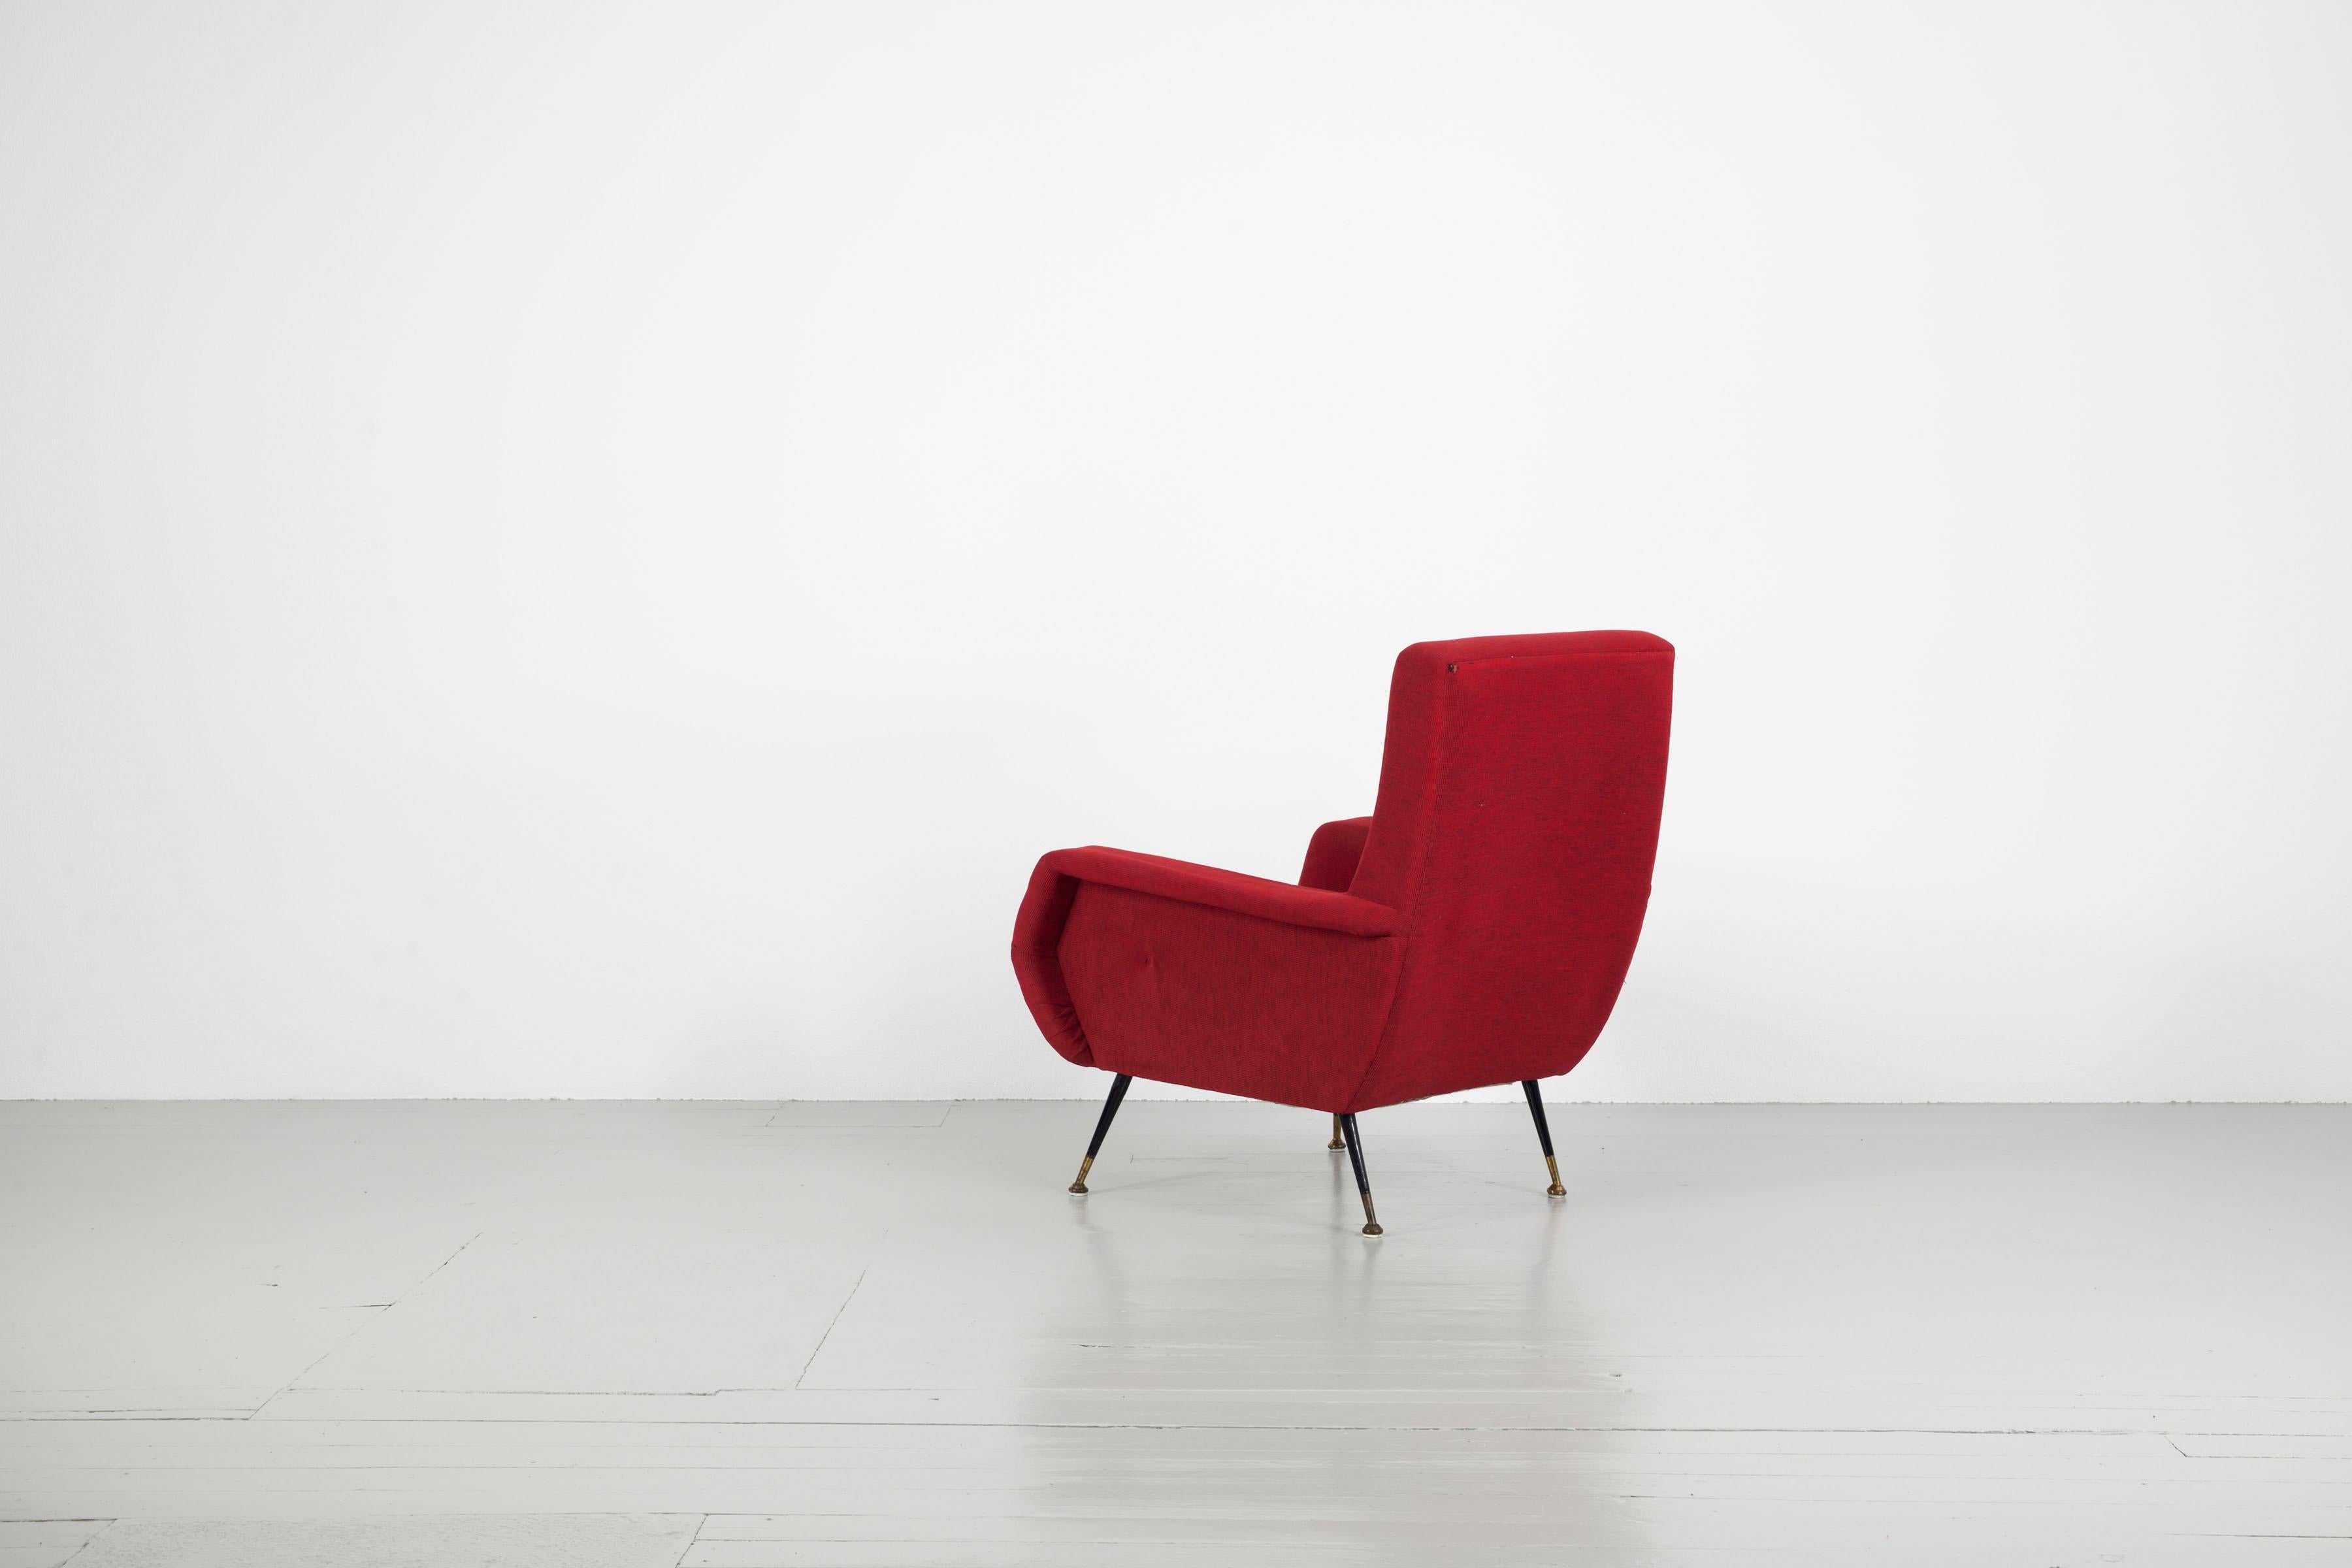 Red Upholstered Armchair with Metal Base, Brass Elements, 1950s For Sale 1